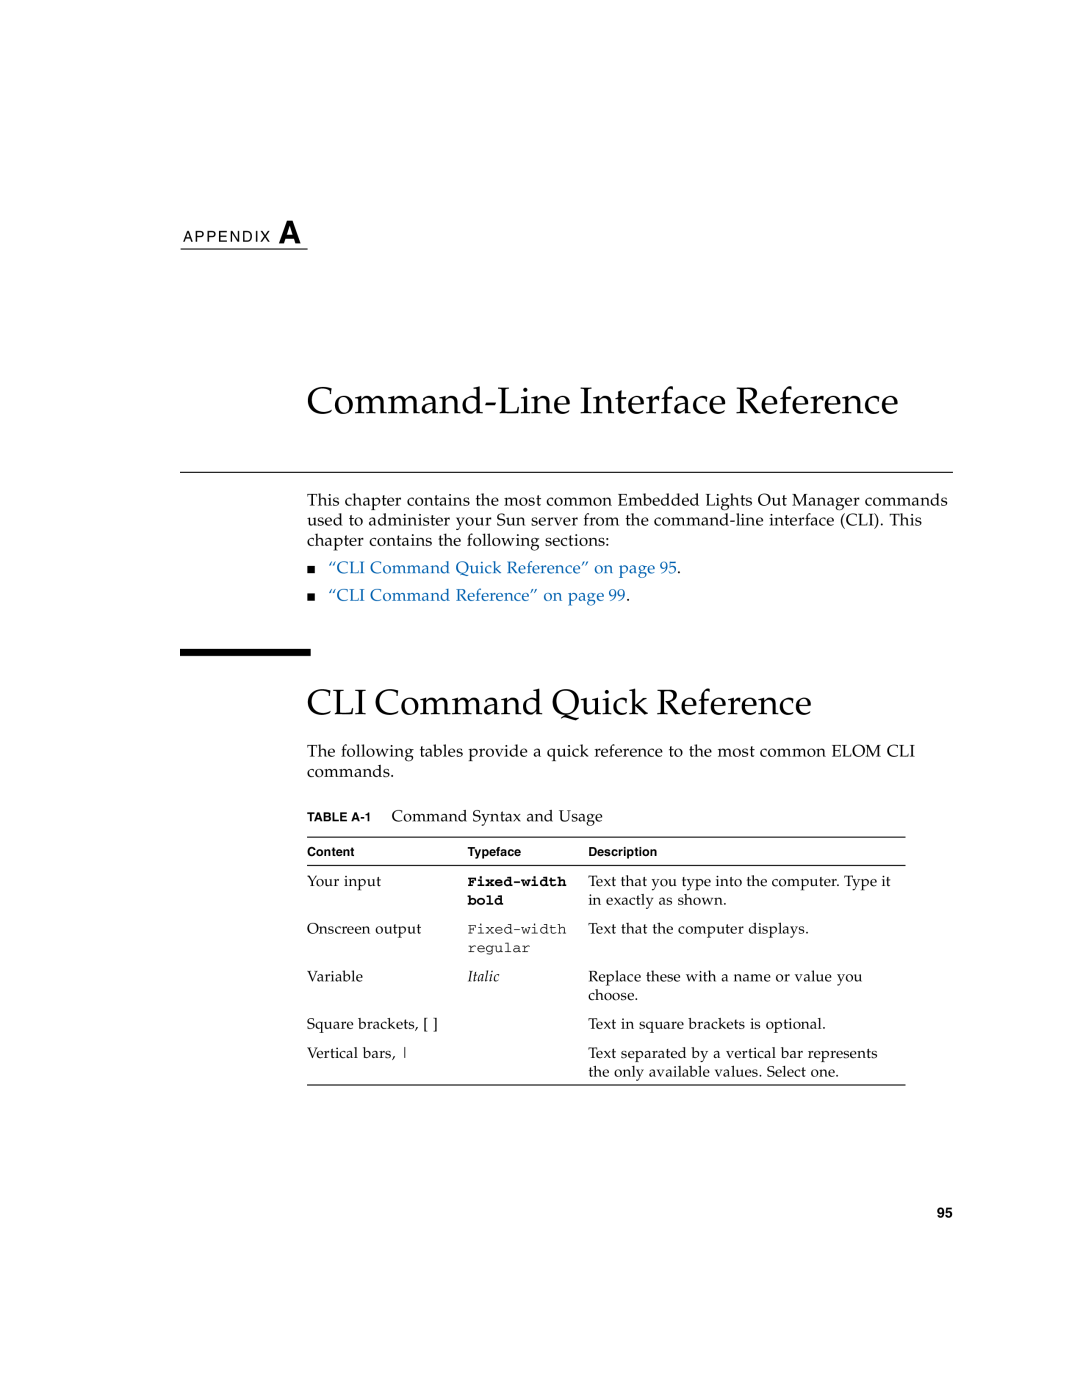 Sun Microsystems X4150 manual Command-Line Interface Reference, CLI Command Quick Reference 